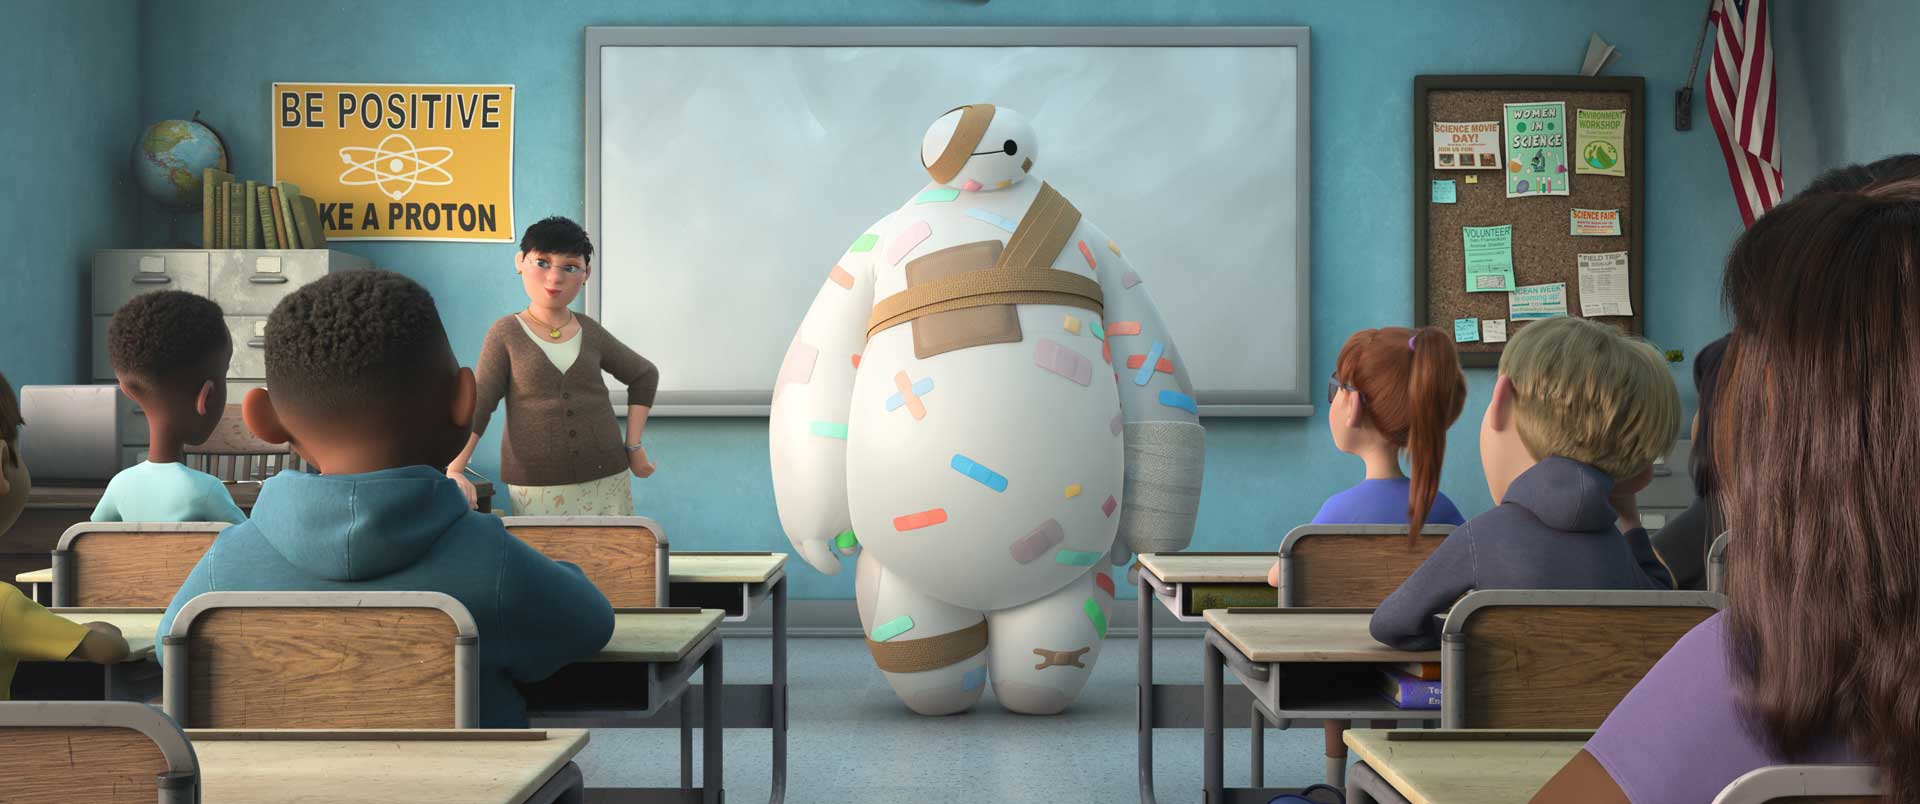 Baymax with bandages